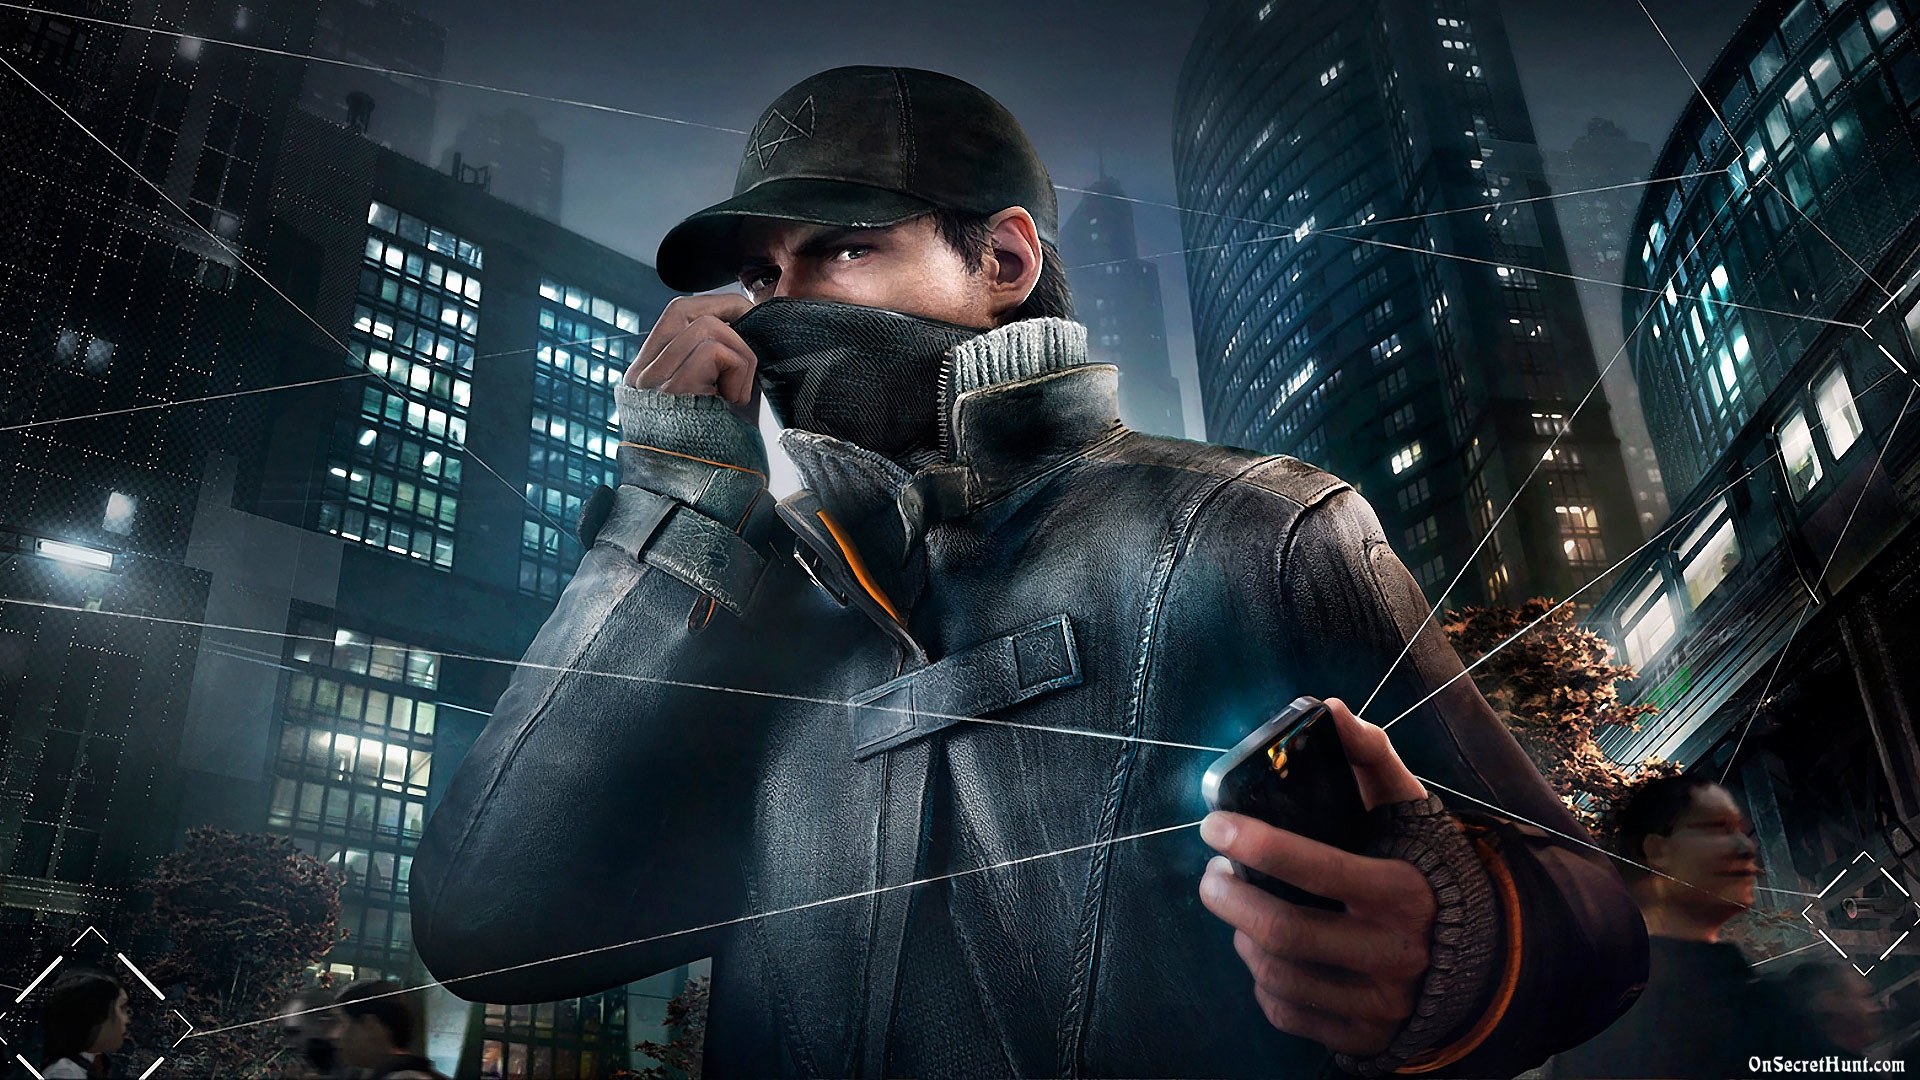 Aiden Pearce Watch Dogs Wallpaper Image Pictures Photos HD